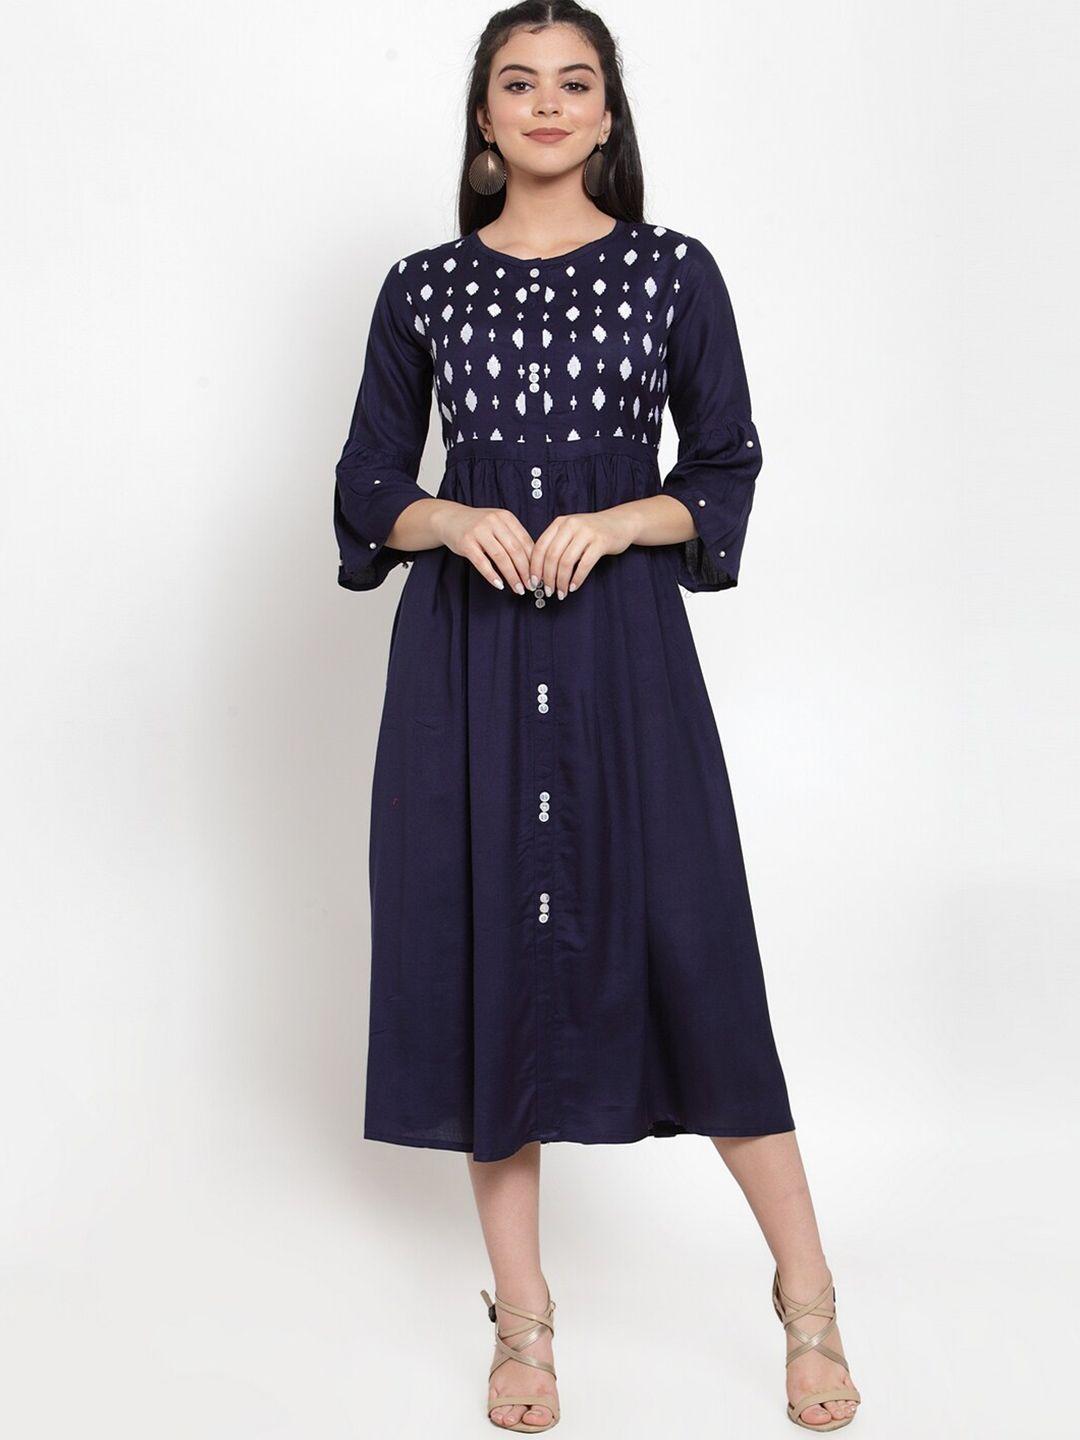 miaz lifestyle geometric embroidered bell sleeves fit & flare midi dress